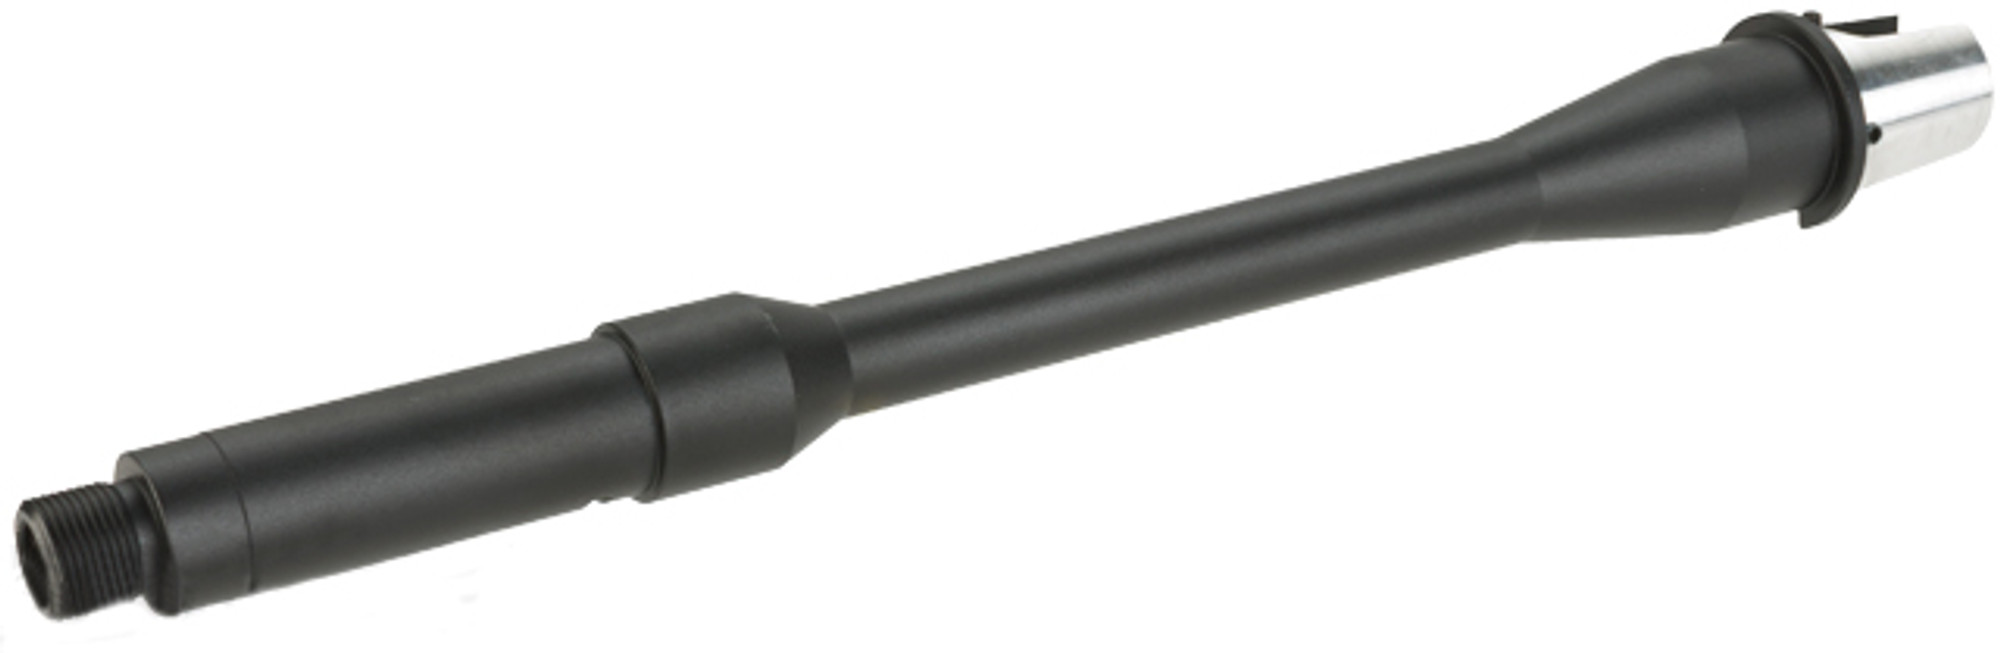 G&P Tapered 10.5" CQB/R CNC Aluminum GP-T Outer Barrel for G&P GP-T AEG Receivers